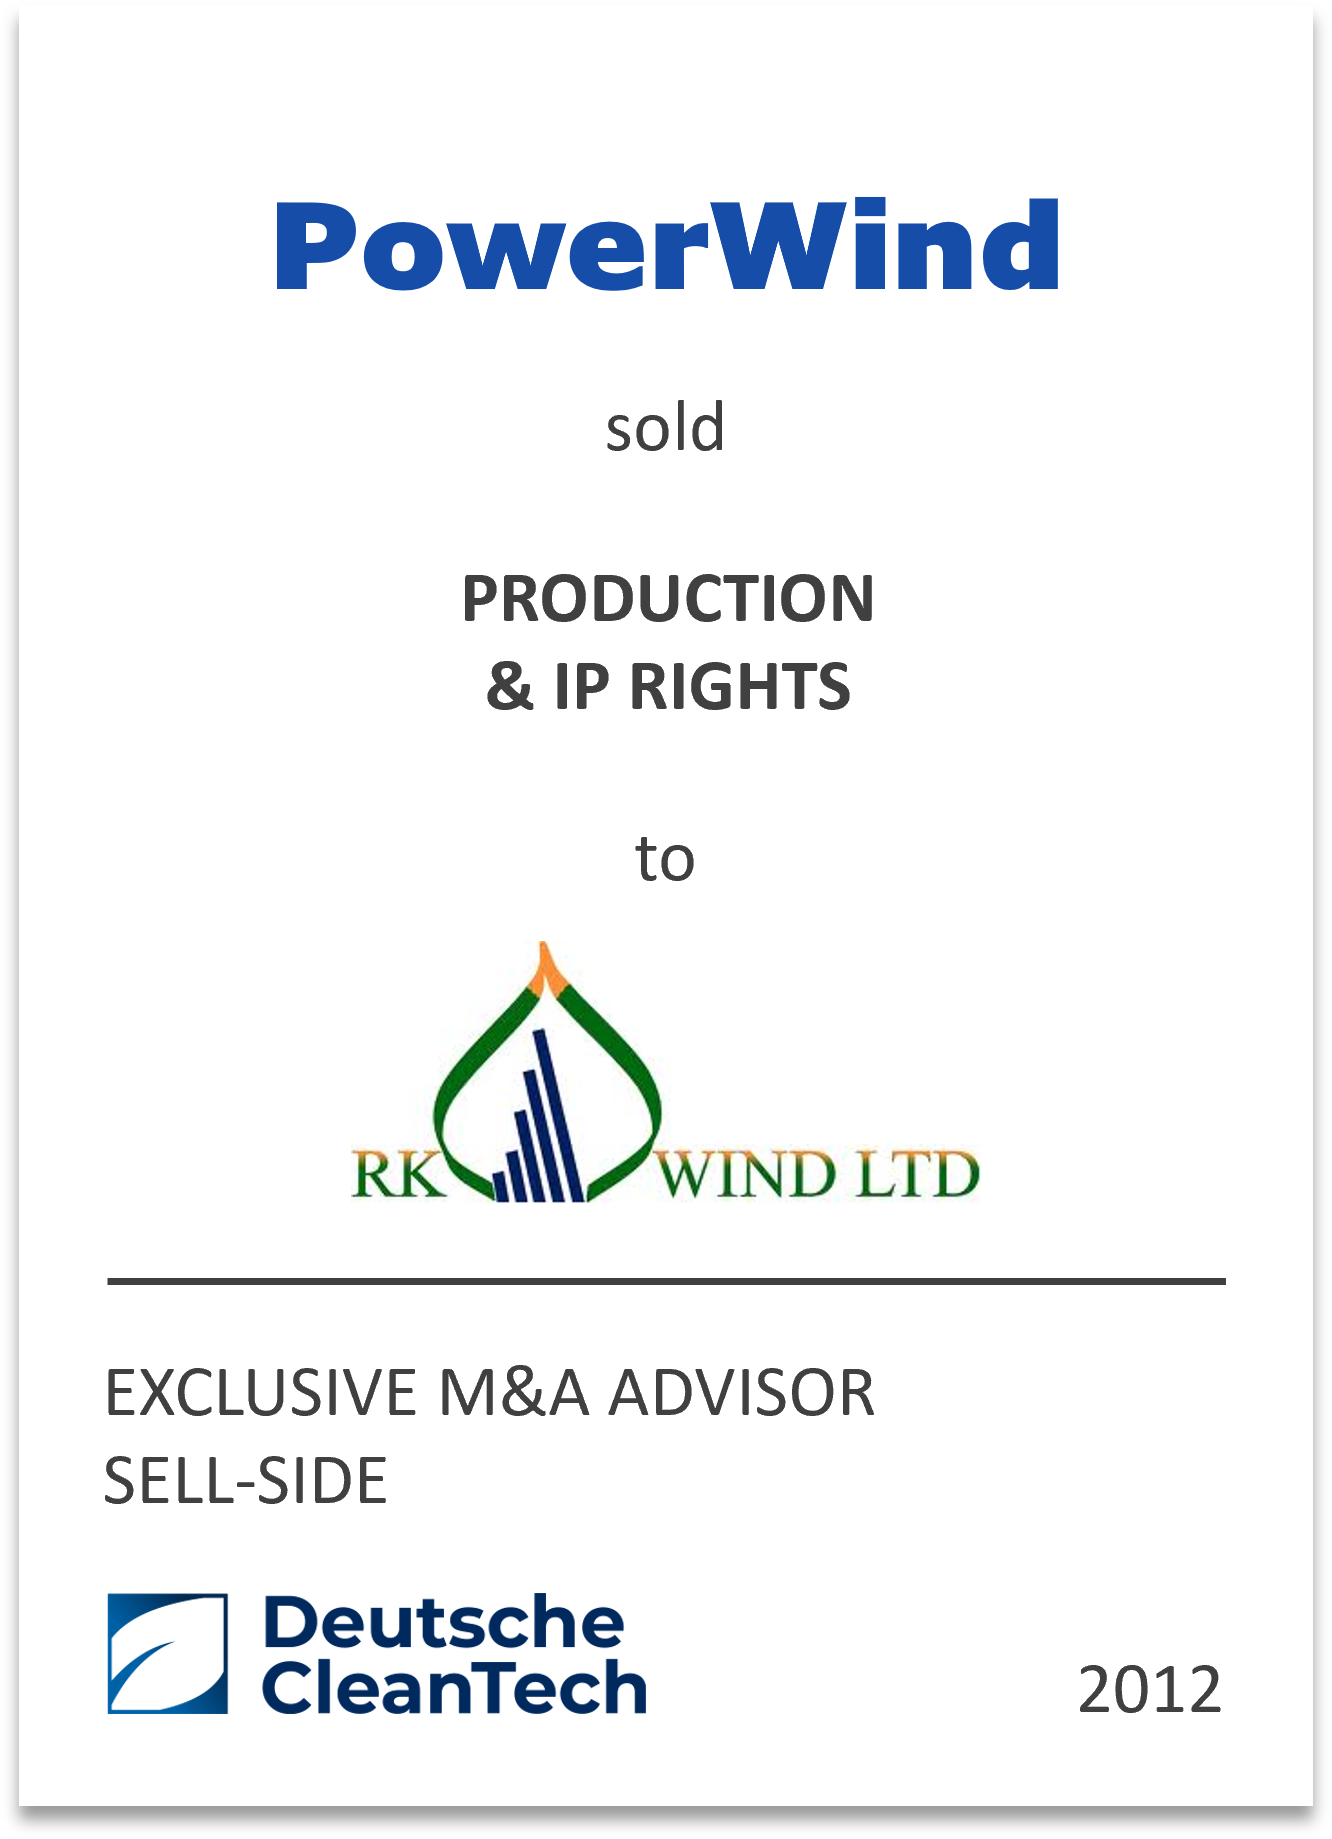 RK Wind Limited has acquired significant assets of the production including IP rights of PowerWind GmbH